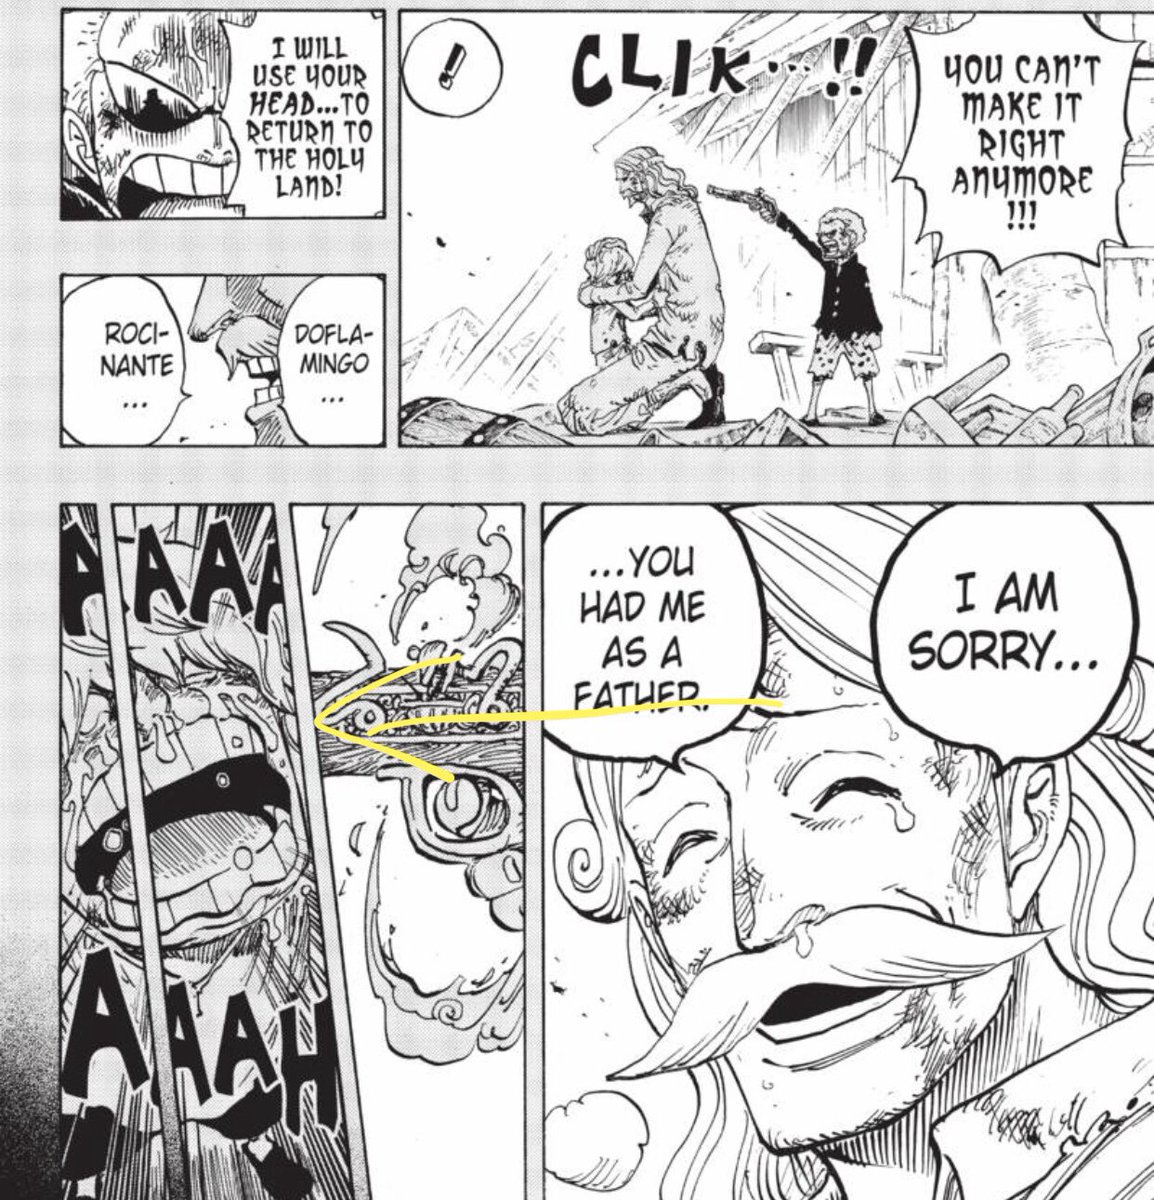 Standout Panel - Obviously this is a timing/sequence of events thing, but the layout makes for interesting framing. Doflamingo’s father set in motion the chain of events that lead Doffy to draw the gun on him, yet the shot is ultimately aimed at himself in the last panel  #OPGrant